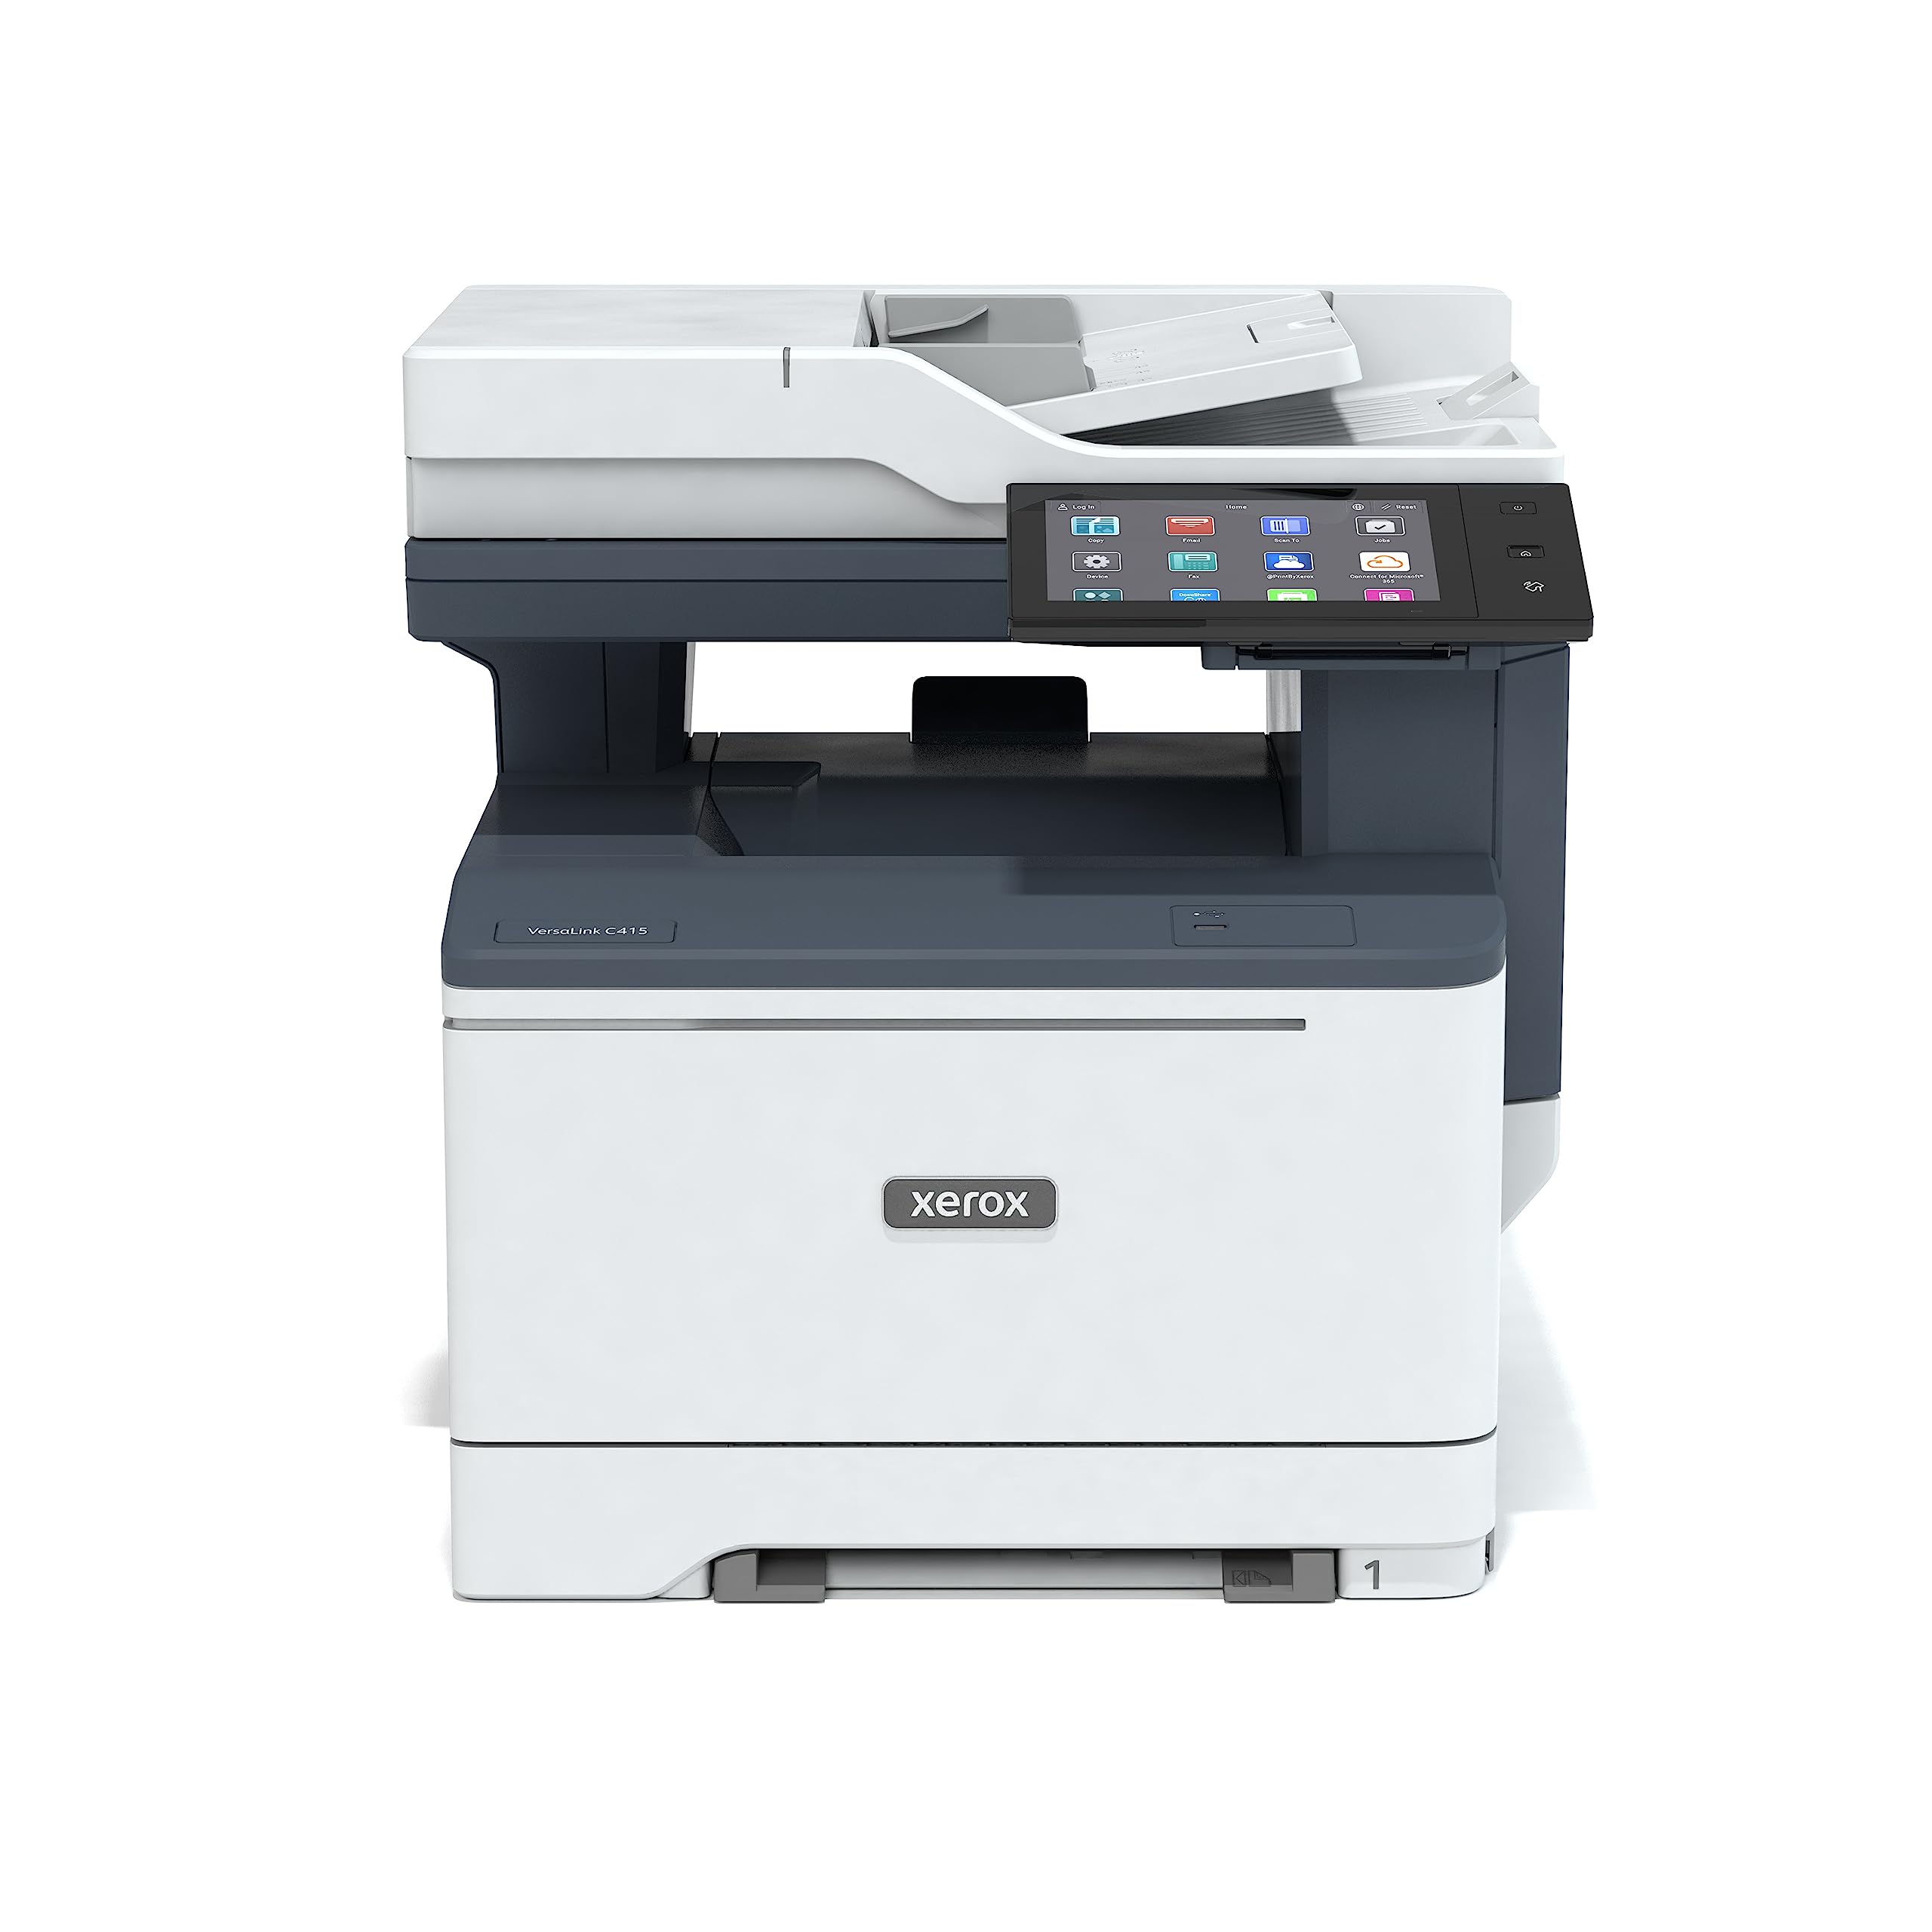 Xerox C415 Color Printer, UP to 42PPM, Duplex